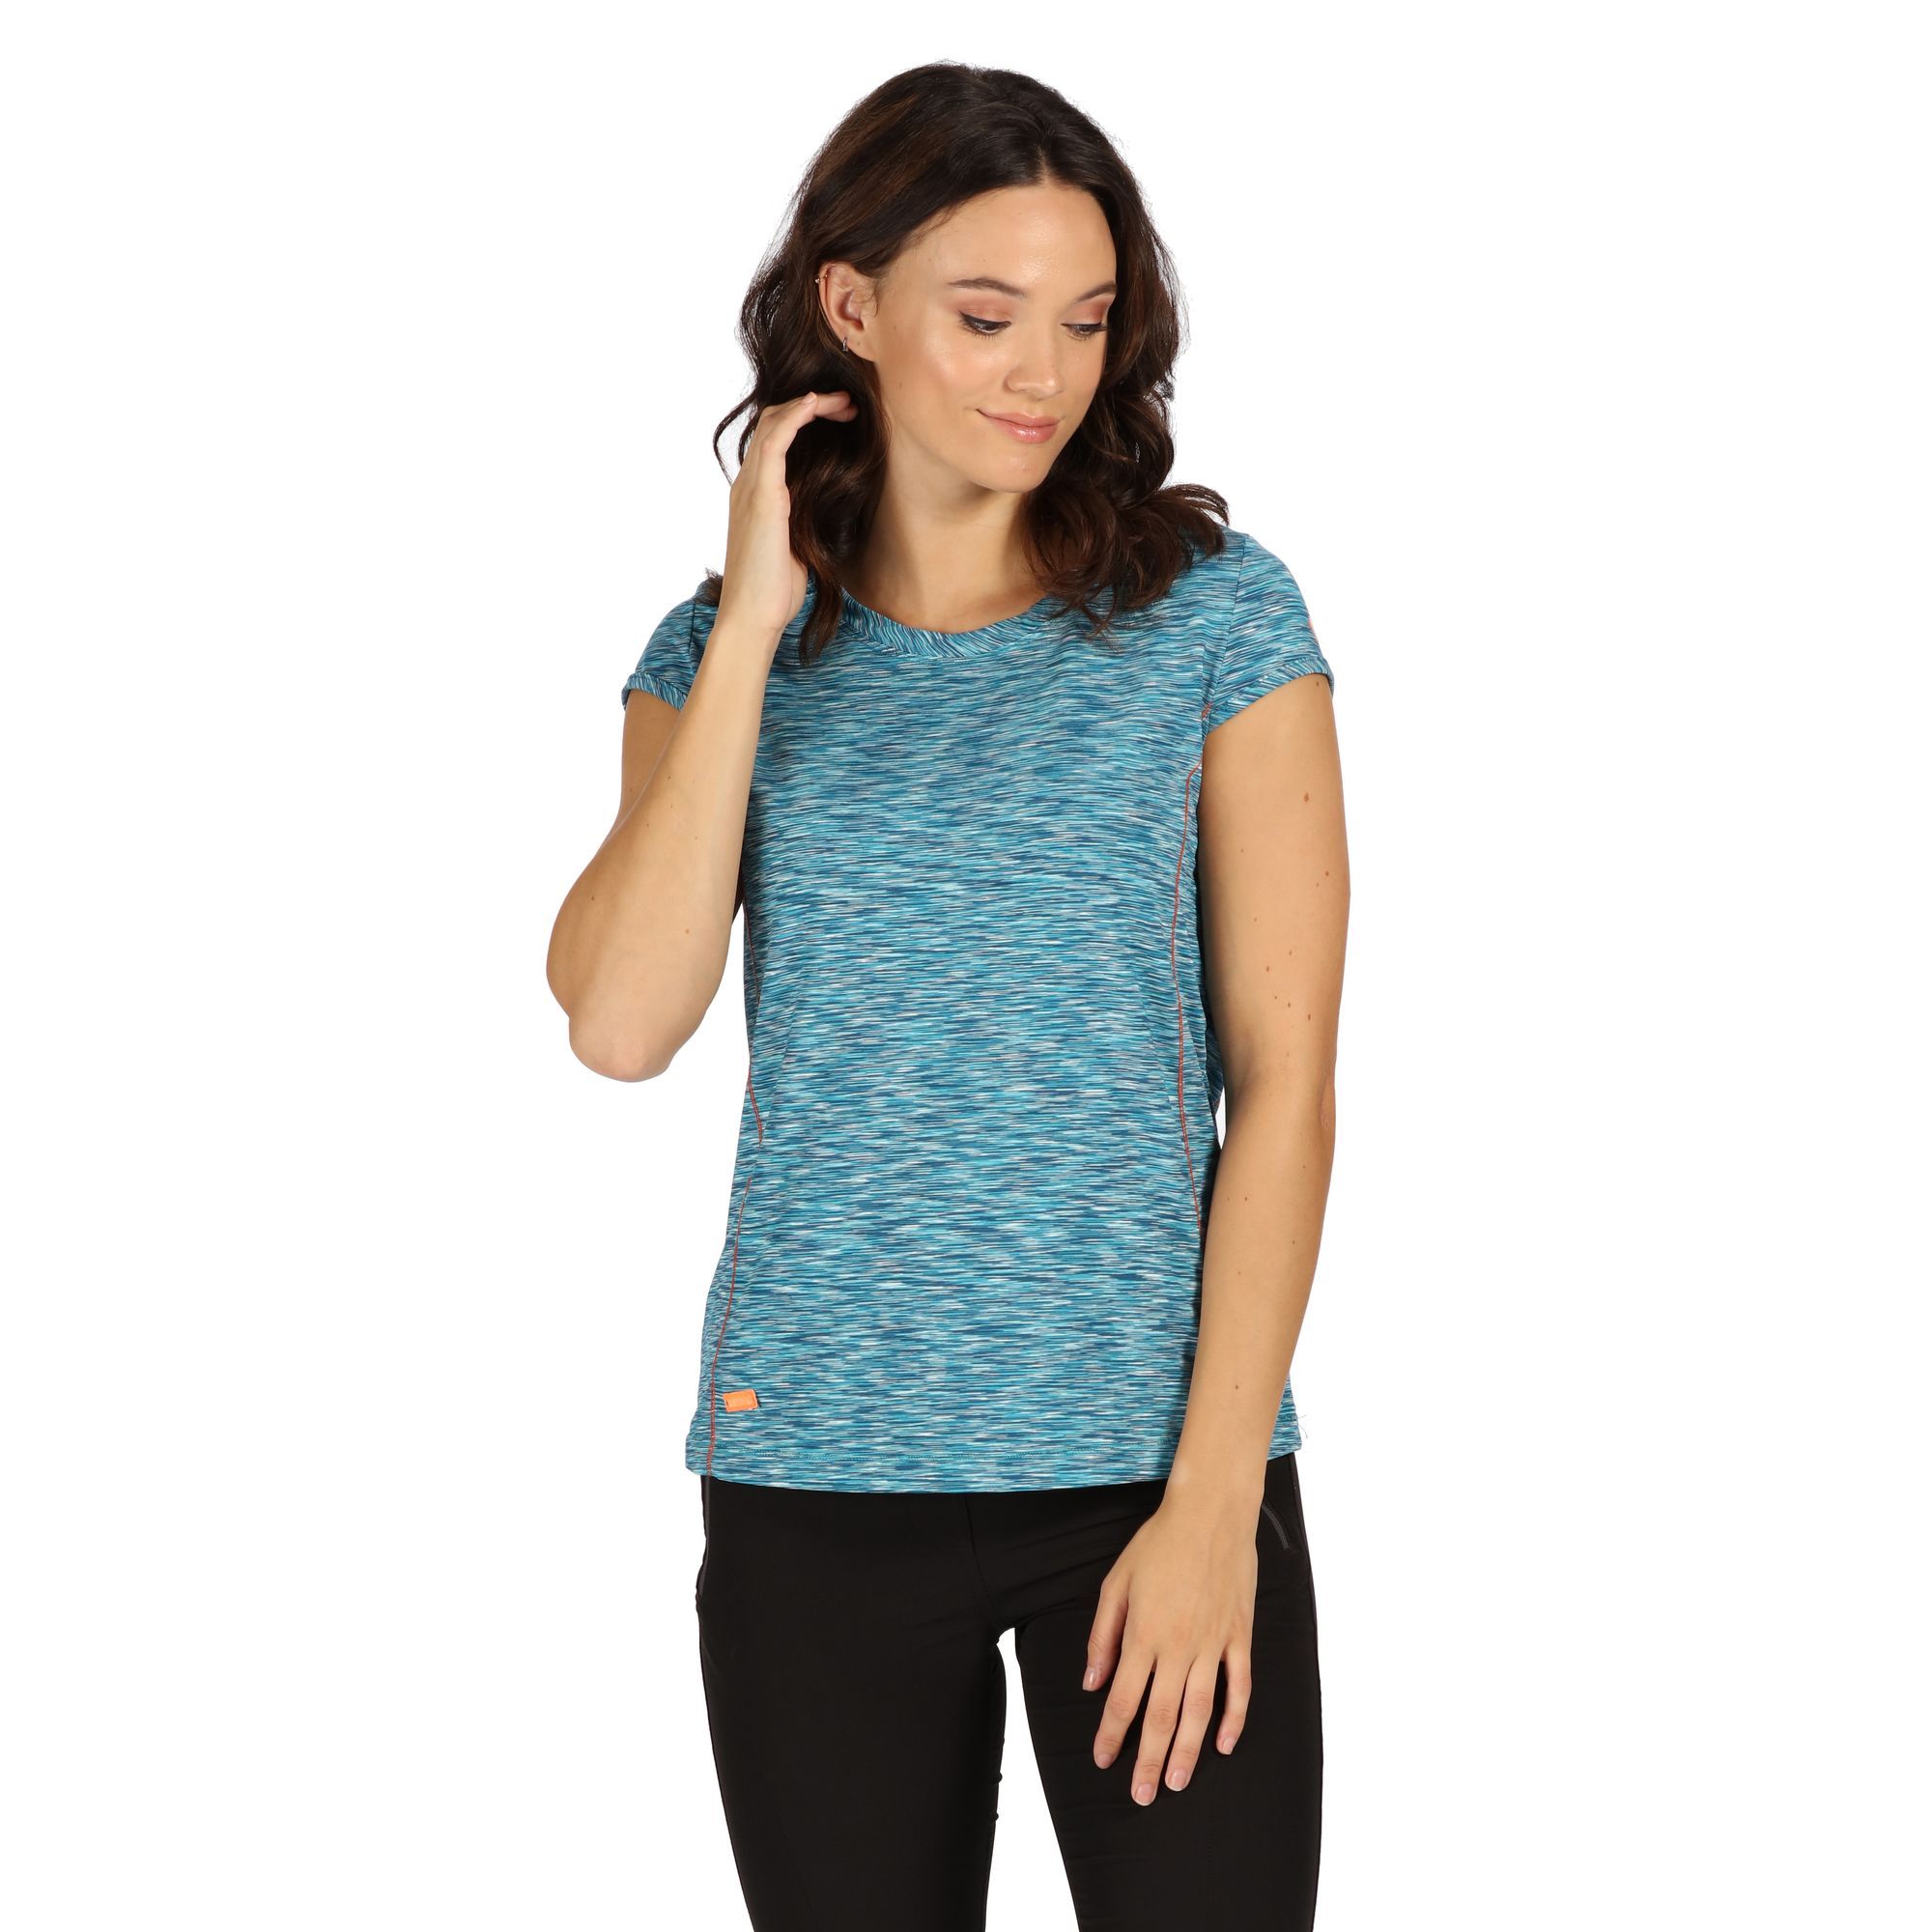 100% polyester. Womens short sleeve t-shirt. Made of soft-touch, marl polyester that efficiently transfers moisture away from your skin for lasting comfort. Designed with a hint of stretch to be form fitting without being tight to allow a natural range of movement during agile hikes and walks. With the Regatta print on the sleeve. Regatta Womens sizing (bust approx): 6 (30in/76cm), 8 (32in/81cm), 10 (34in/86cm), 12 (36in/92cm), 14 (38in/97cm), 16 (40in/102cm), 18 (43in/109cm), 20 (45in/114cm), 22 (48in/122cm), 24 (50in/127cm), 26 (52in/132cm), 28 (54in/137cm), 30 (56in/142cm), 32 (58in/147cm), 34 (60in/152cm), 36 (62in/158cm).